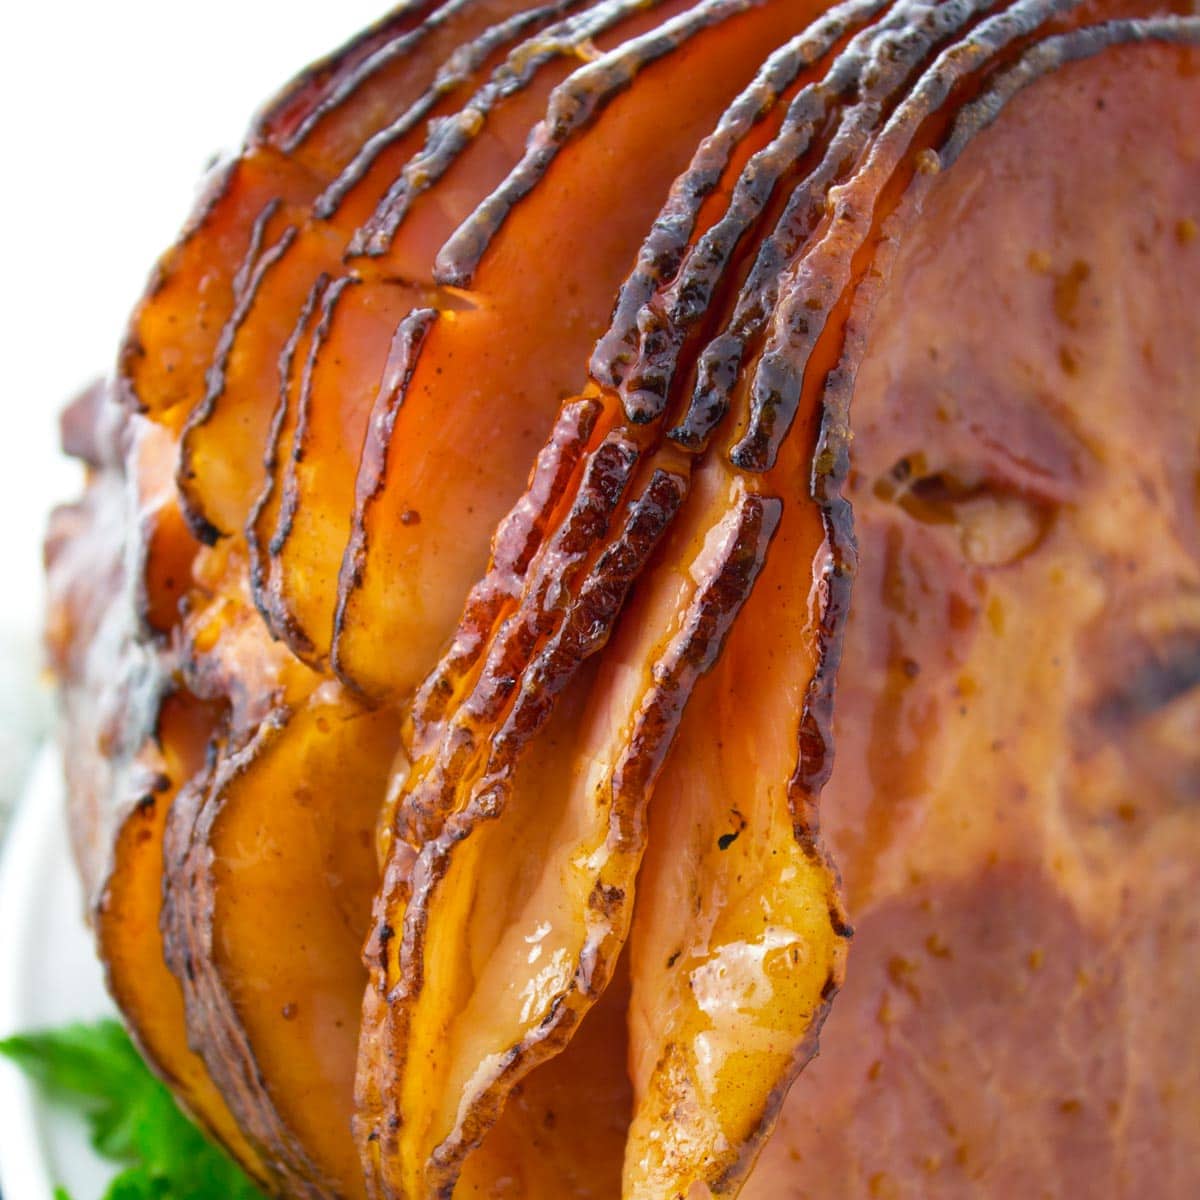 Pineapple Baked Ham Recipe - How To Bake The Perfect Holiday Ham